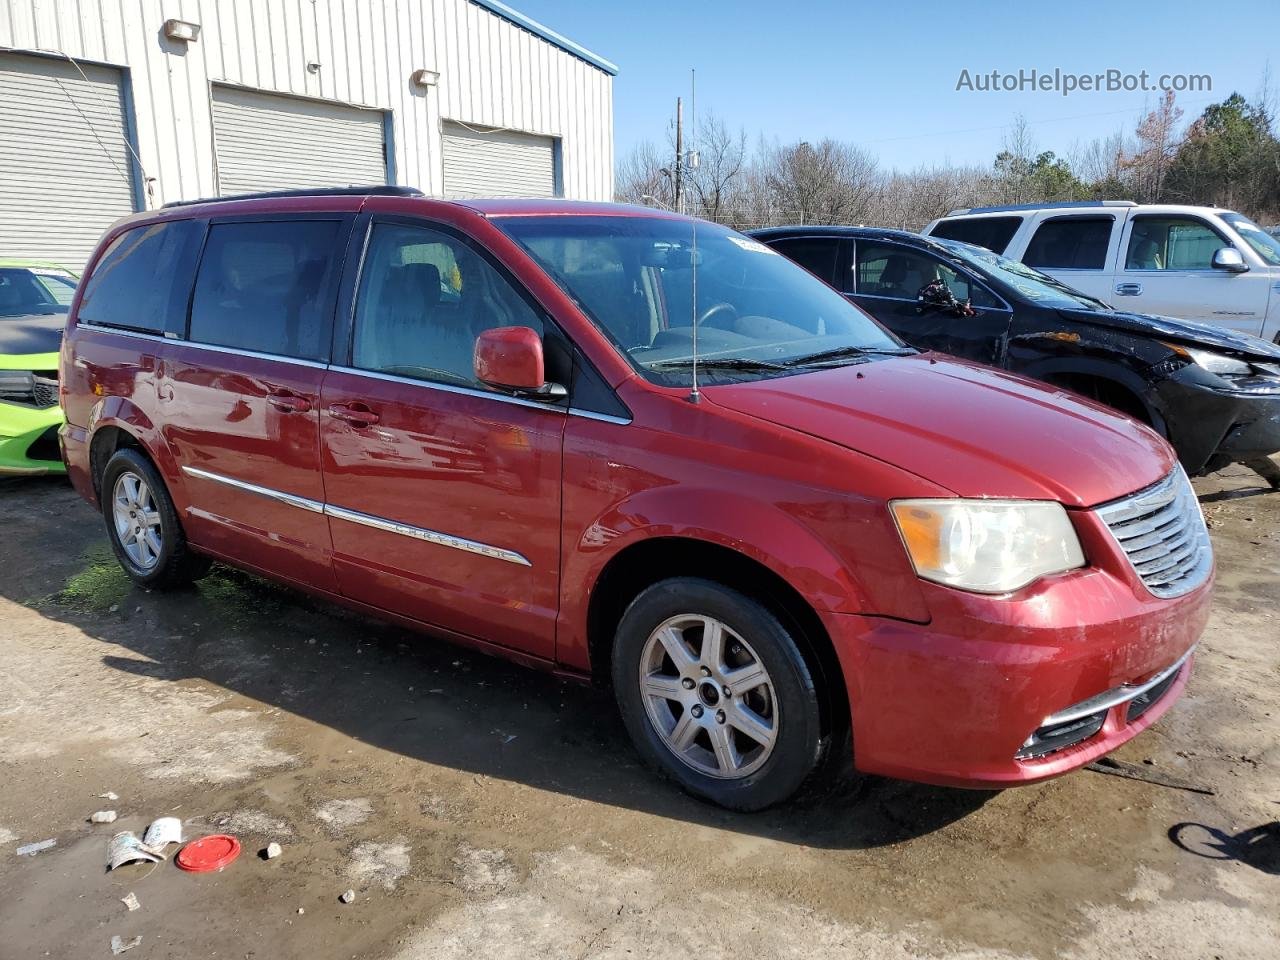 2011 Chrysler Town & Country Touring Бордовый vin: 2A4RR5DG3BR705024